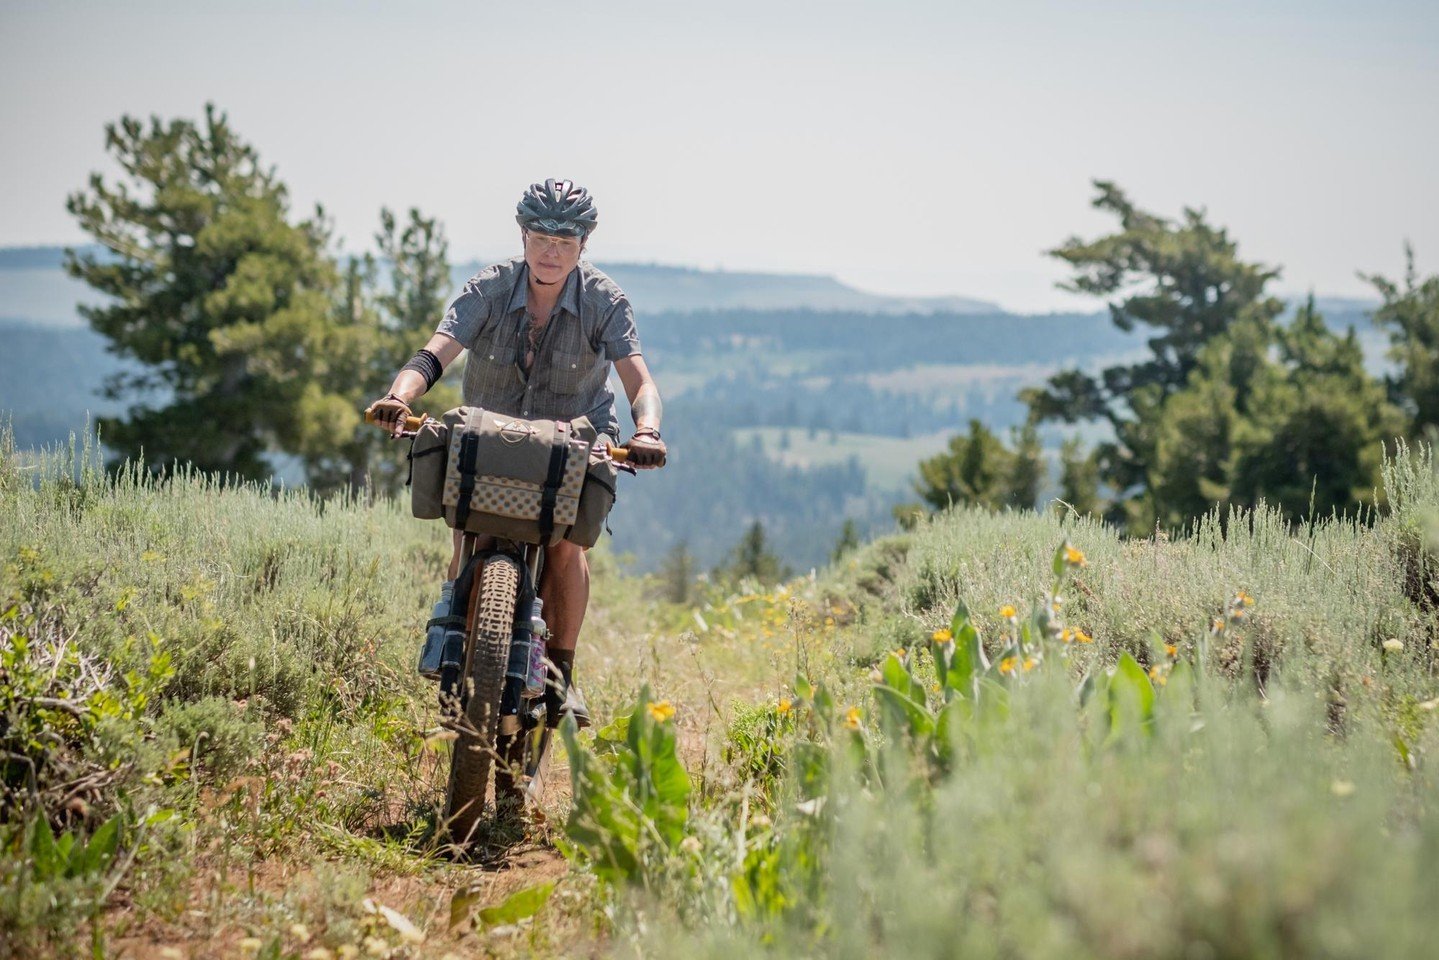 It may still be winter but if you&rsquo;re anything like us you&rsquo;re already dreaming up what bike shenanigans you&rsquo;ll be getting into this summer. Well, save the date because we&rsquo;re happy to announce that The 2024 Oregon Timber Trail R